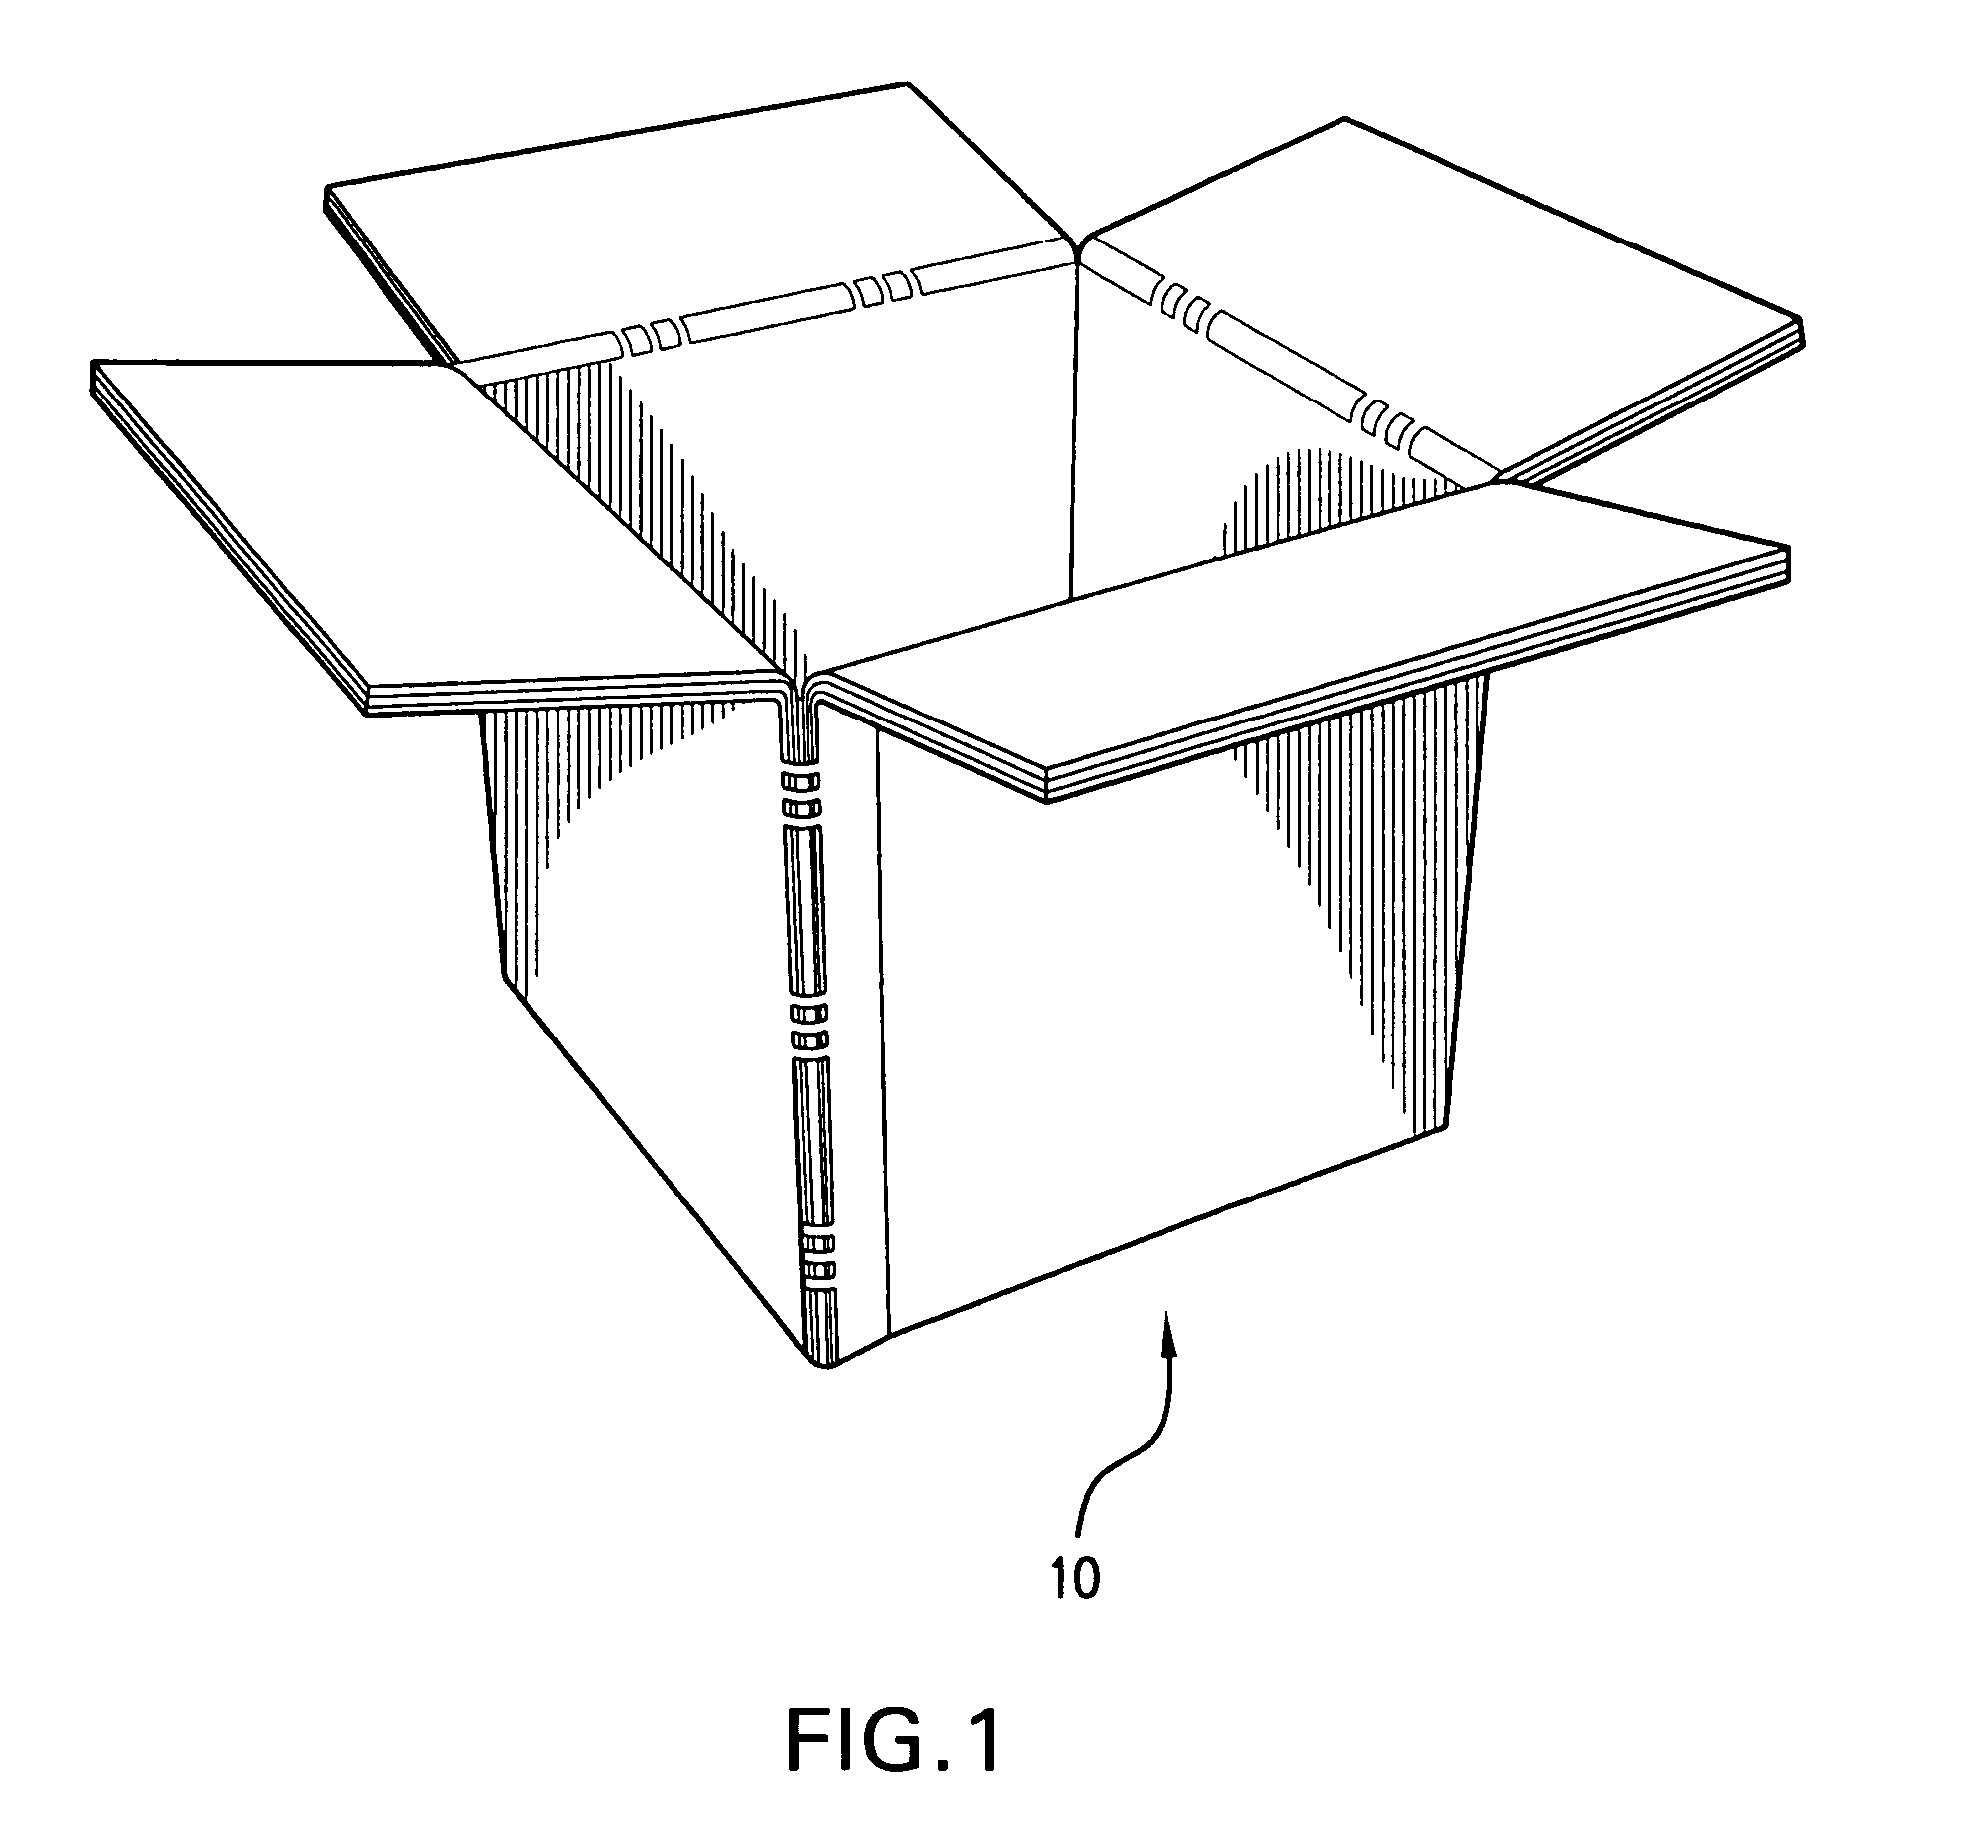 Knockdown corrugated box for temperature control and method of making